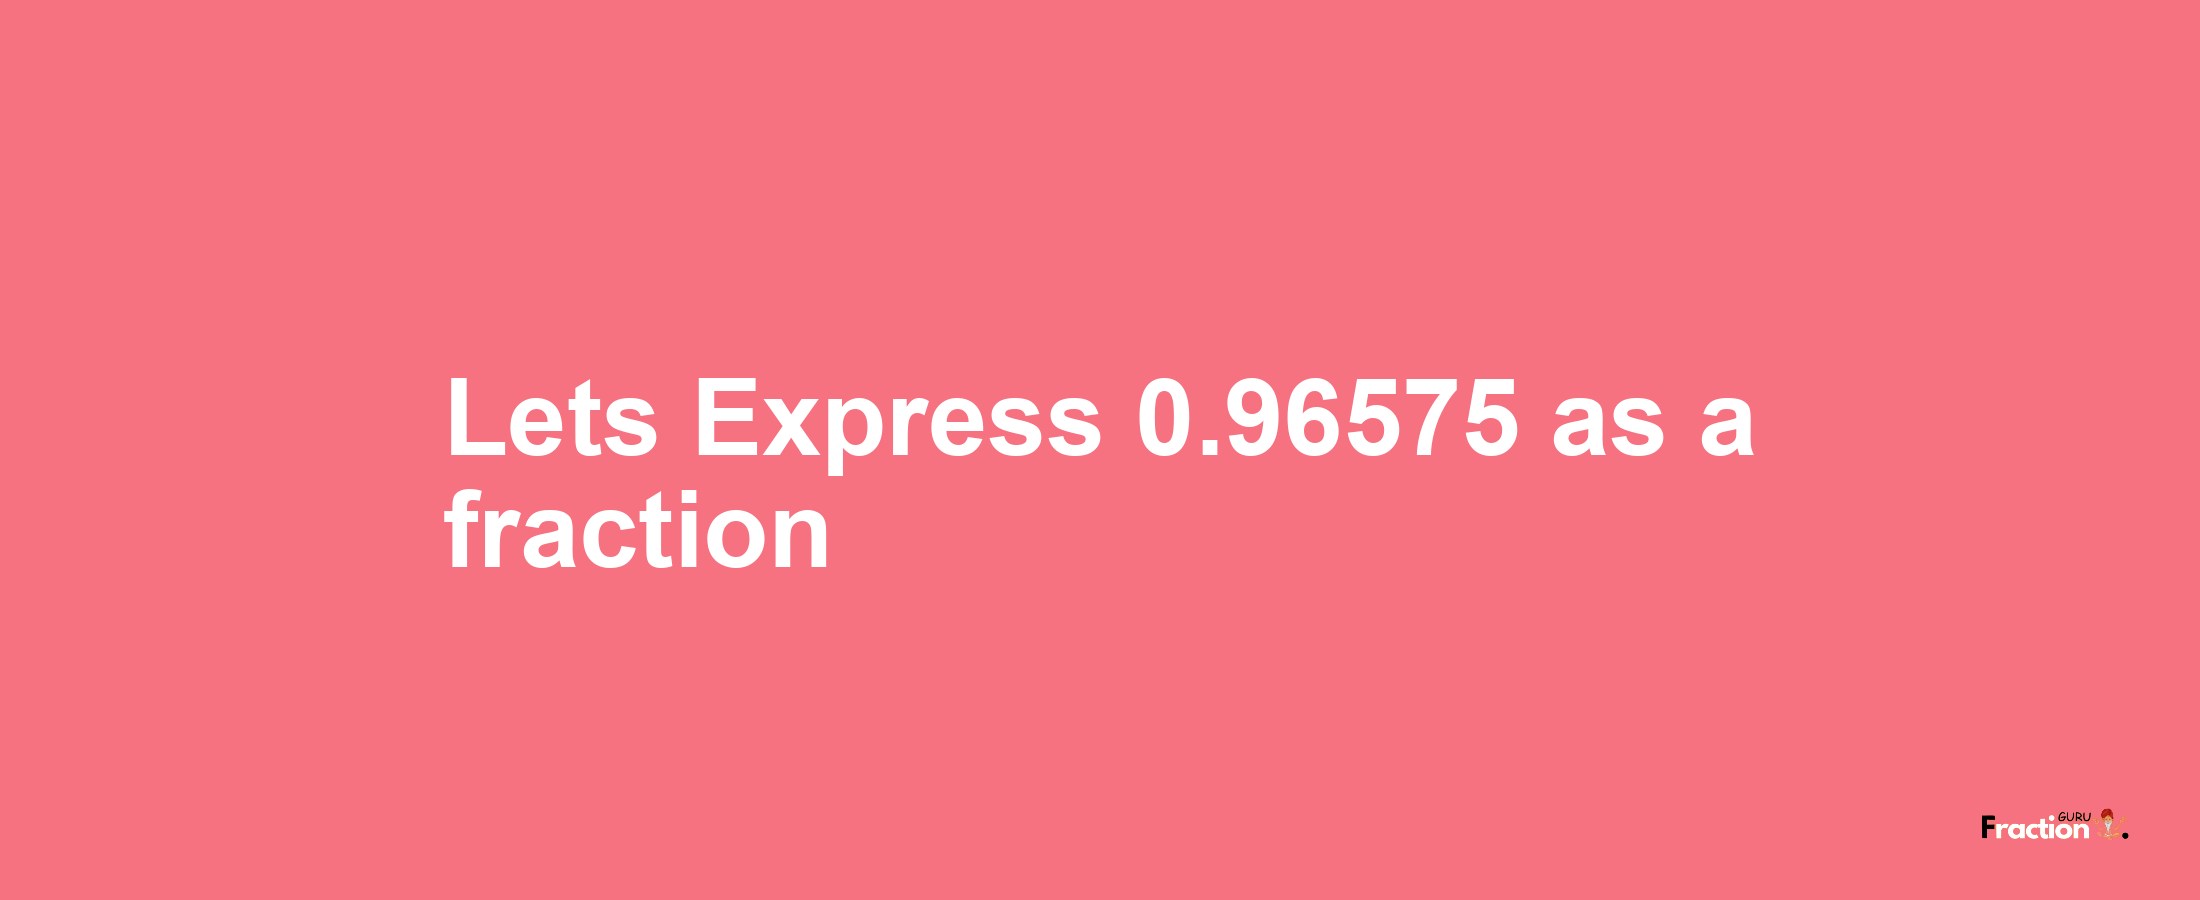 Lets Express 0.96575 as afraction